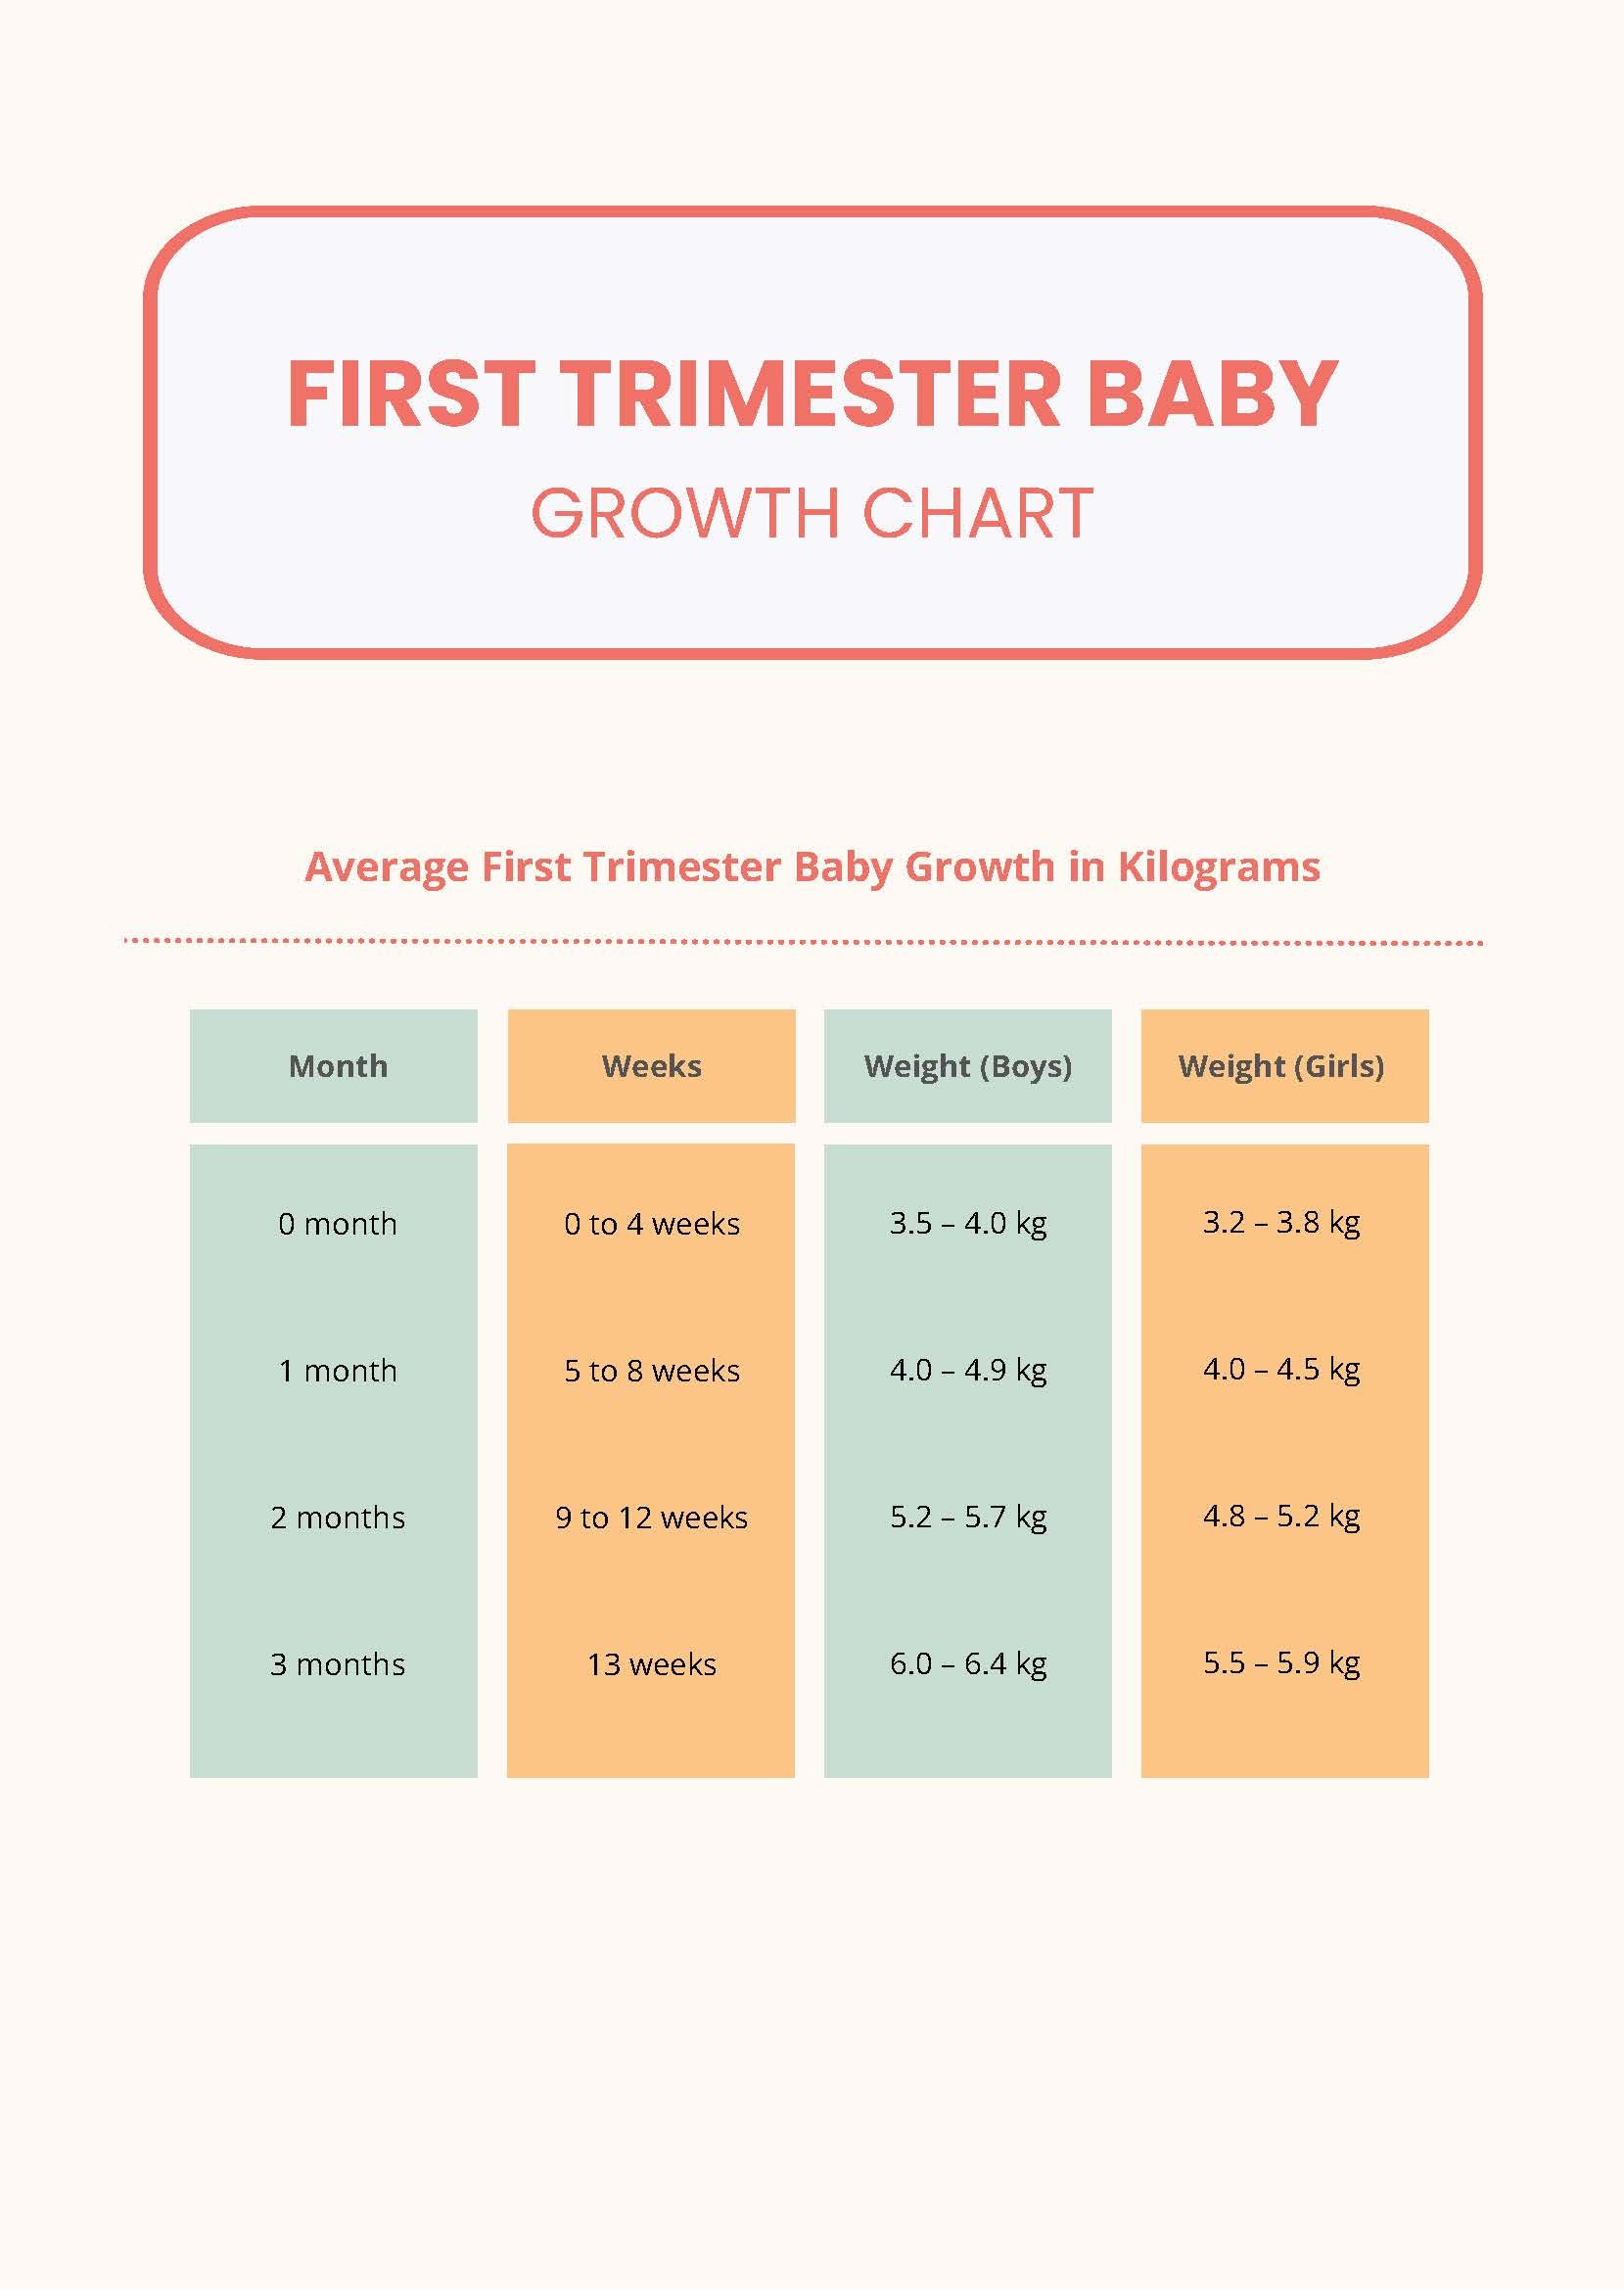 First Trimester Baby Growth Chart